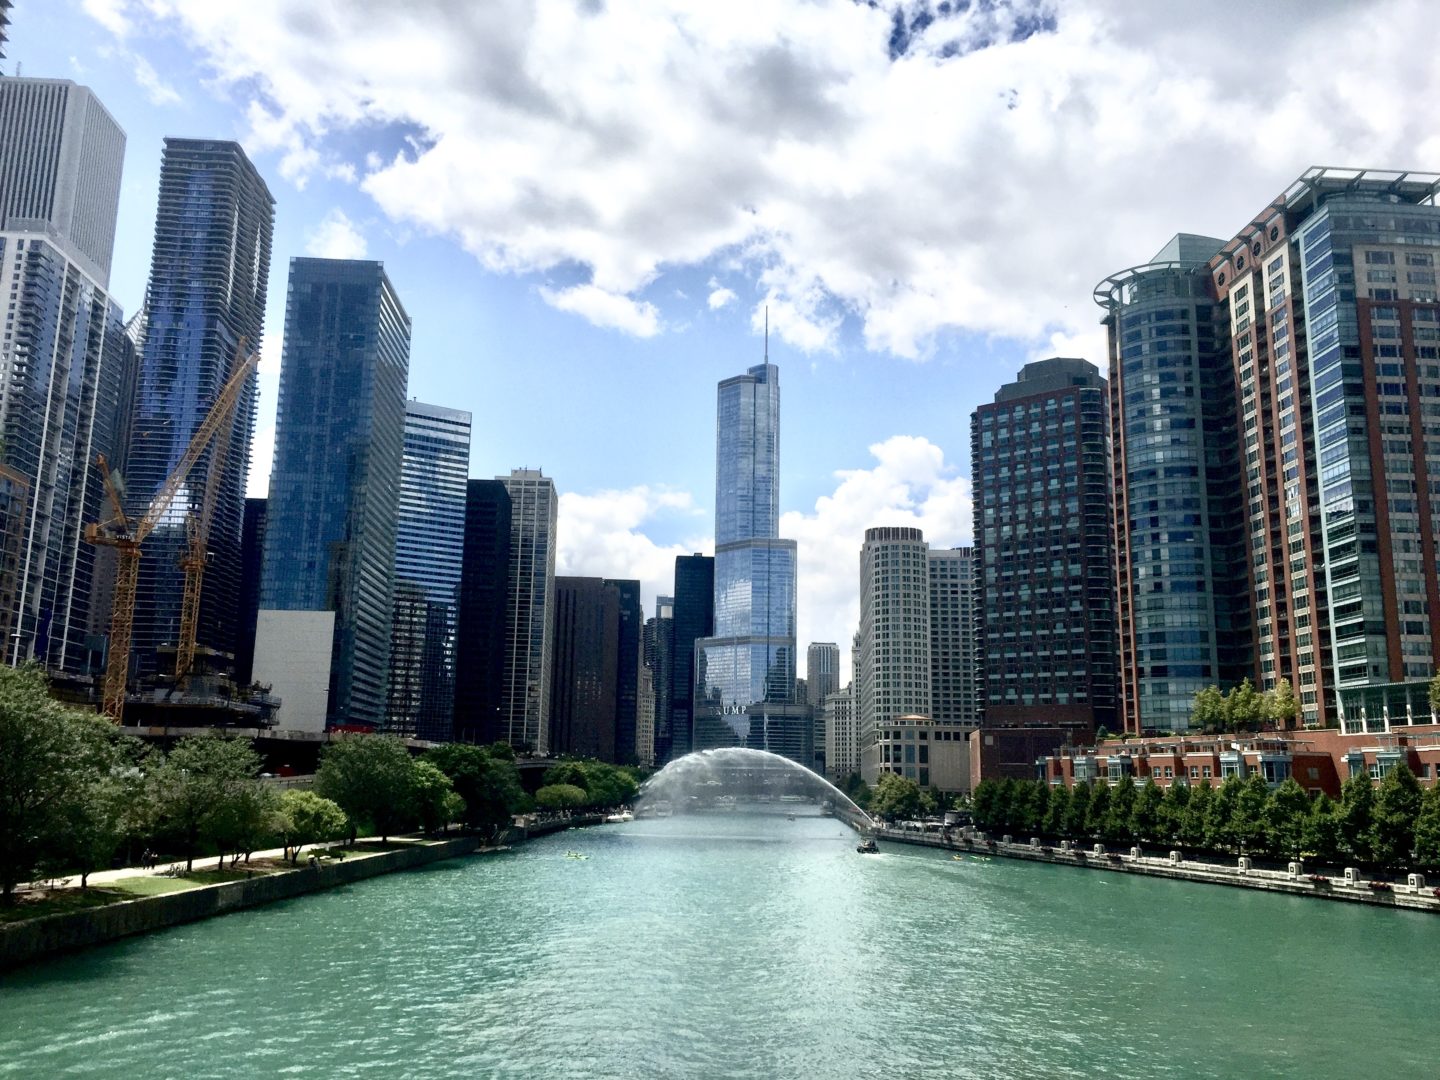 Notes from Chicago: Opinions on the Canadian Banks (part 1)